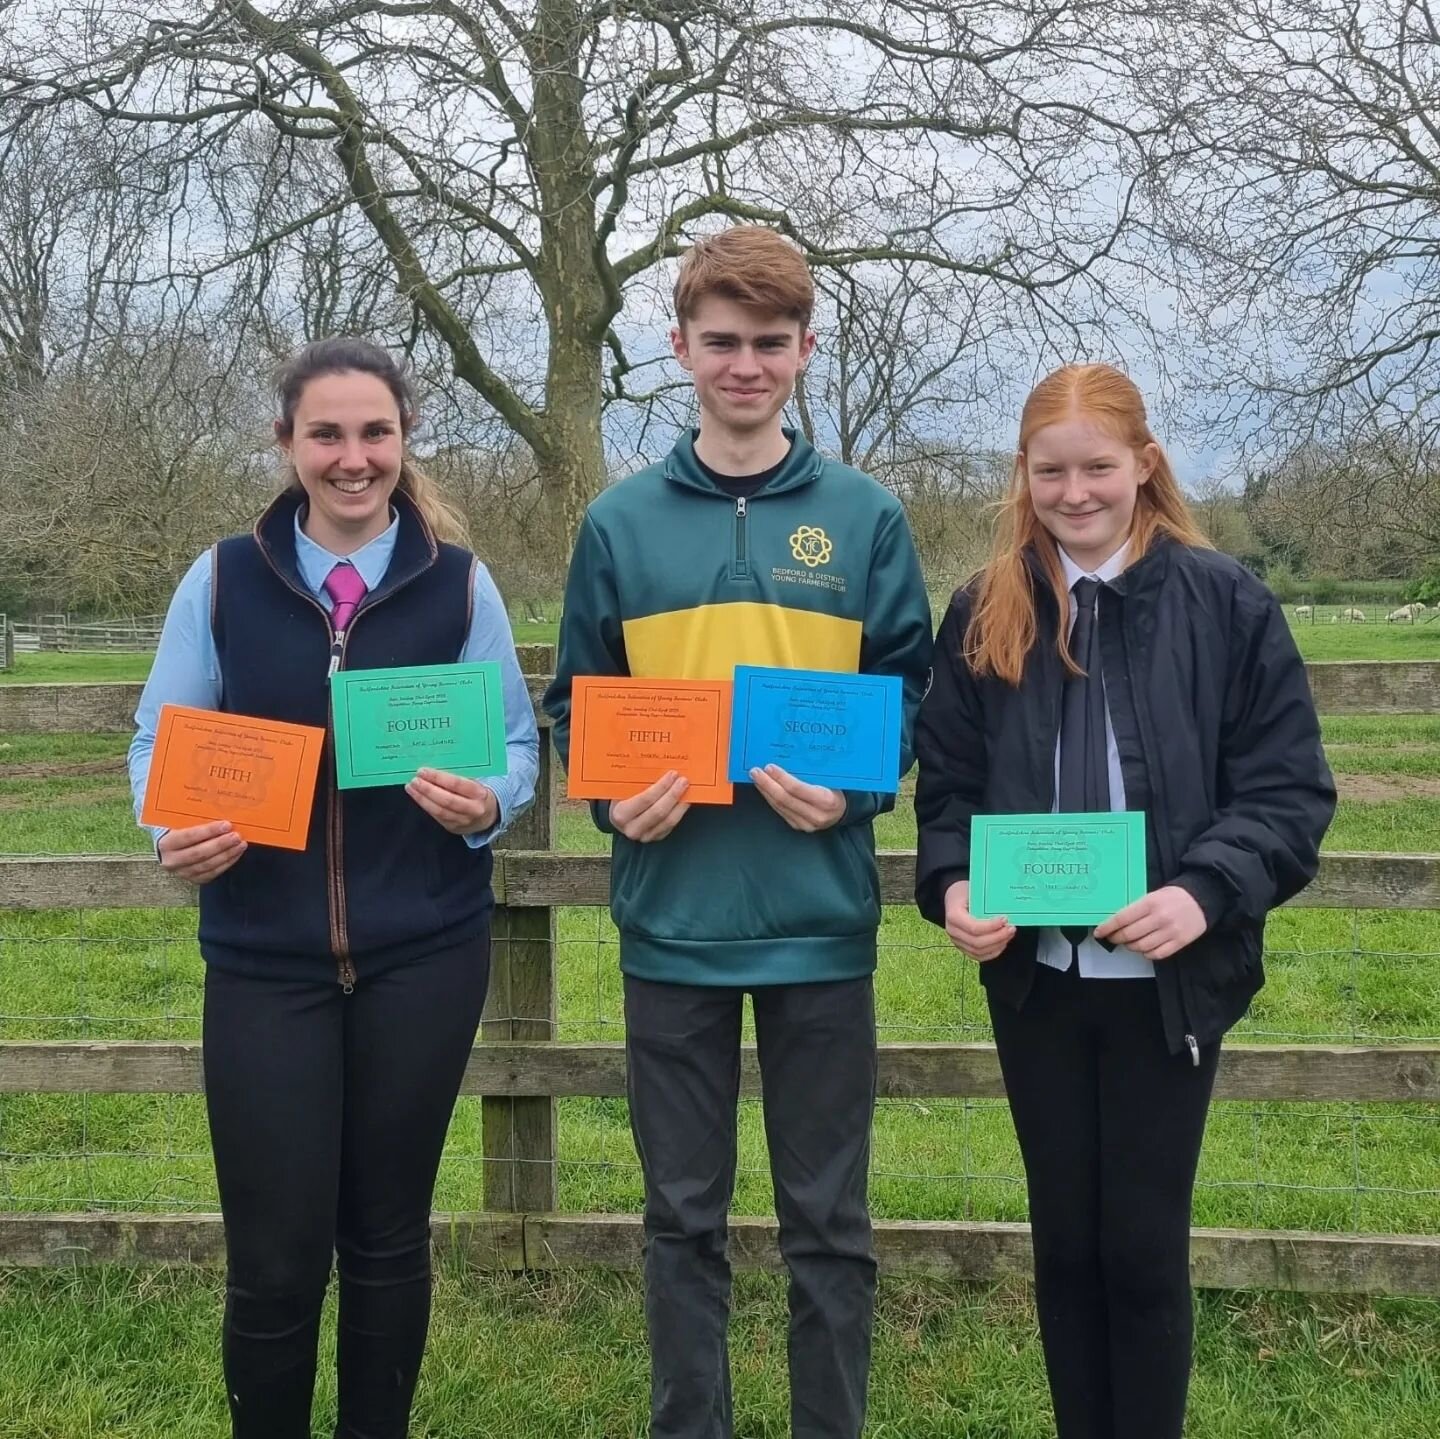 A successful day stockjudging for Bedford Club! 🥳
Yesterday the club attended Parry Cup where members had to judge and give reasons for Beef, Pigs, Lambs and Dairy. For 3 of our members judging stock for the very first time!
Results included:
🟢4th 